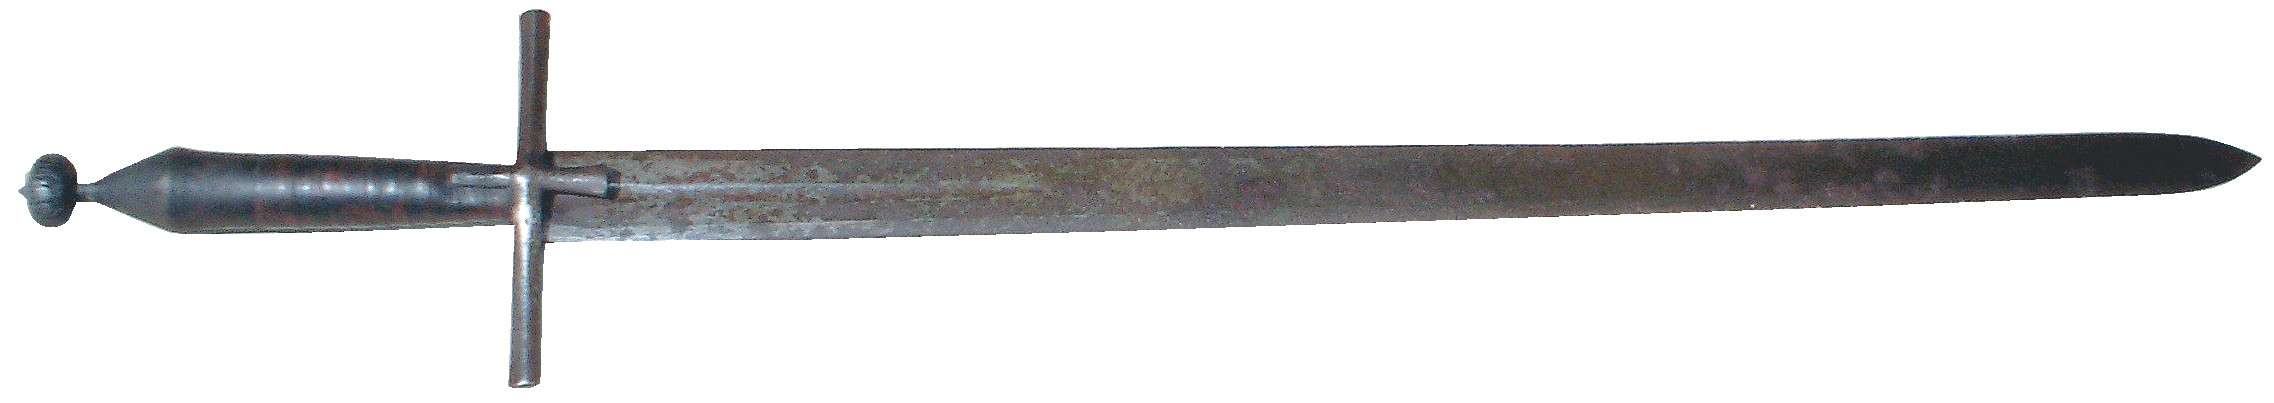 The hand-and-a-half, or bastard, sword was a later version of the broadsword.